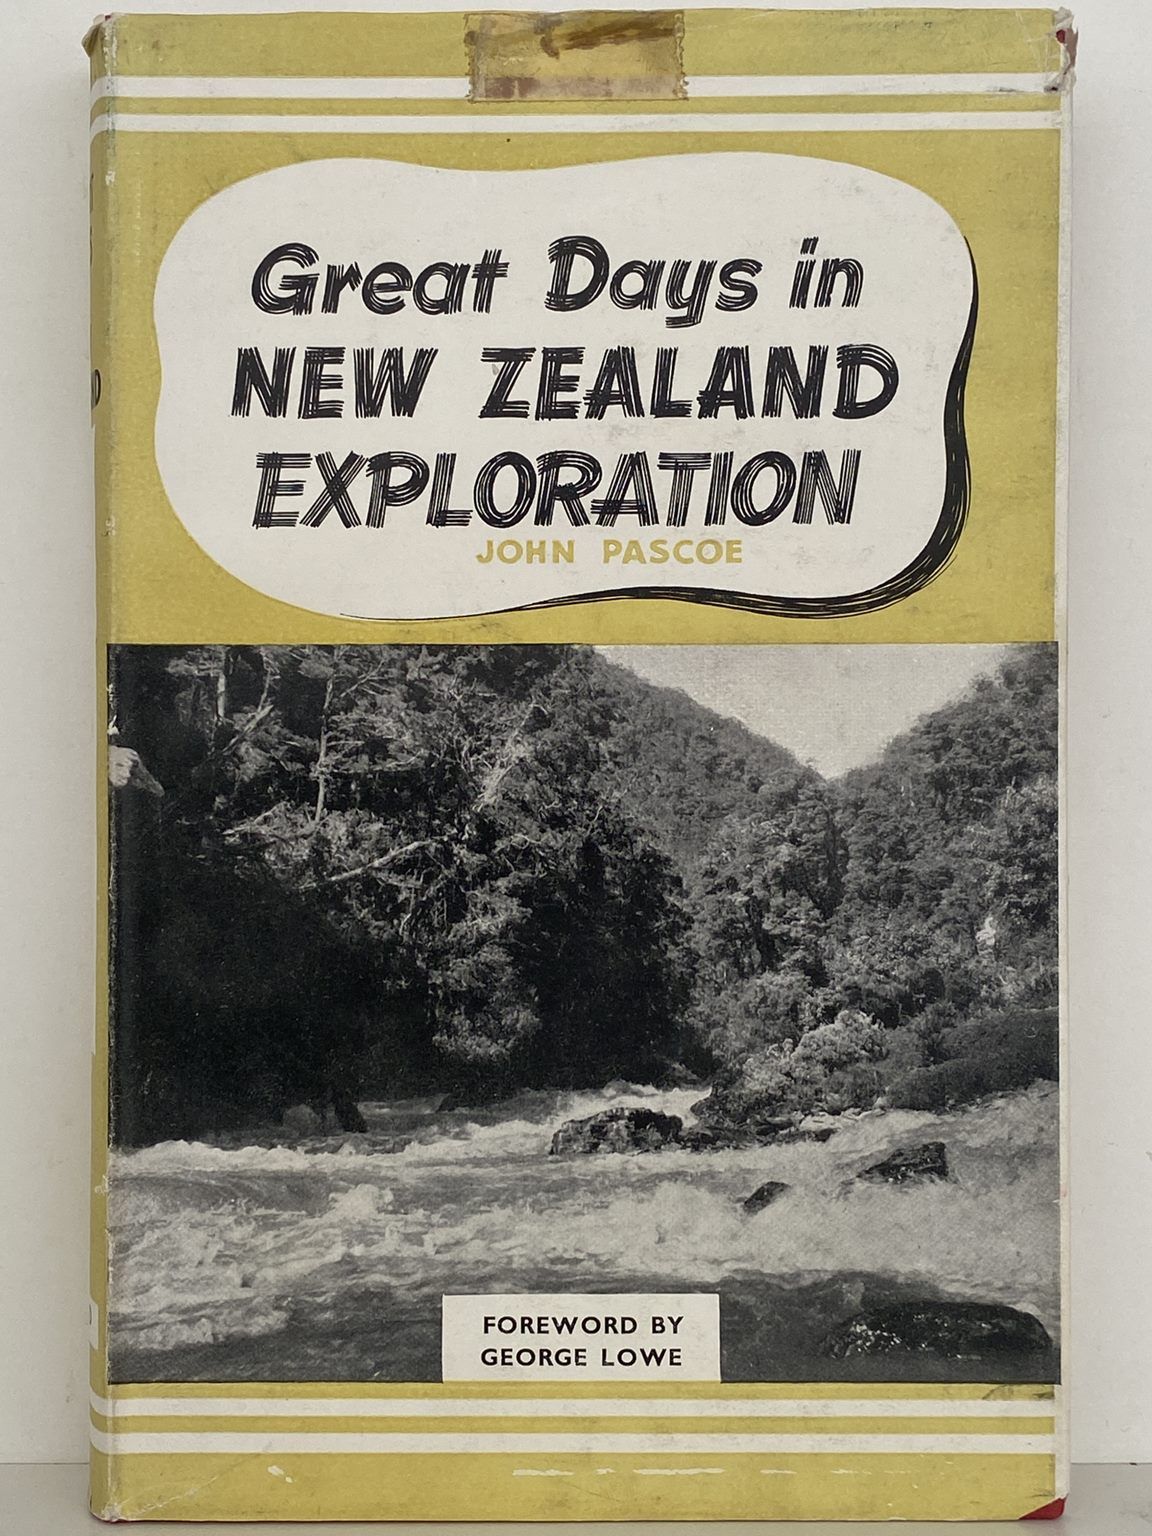 GREAT DAYS IN NEW ZEALAND EXPLORATION: The Bush and the Rain